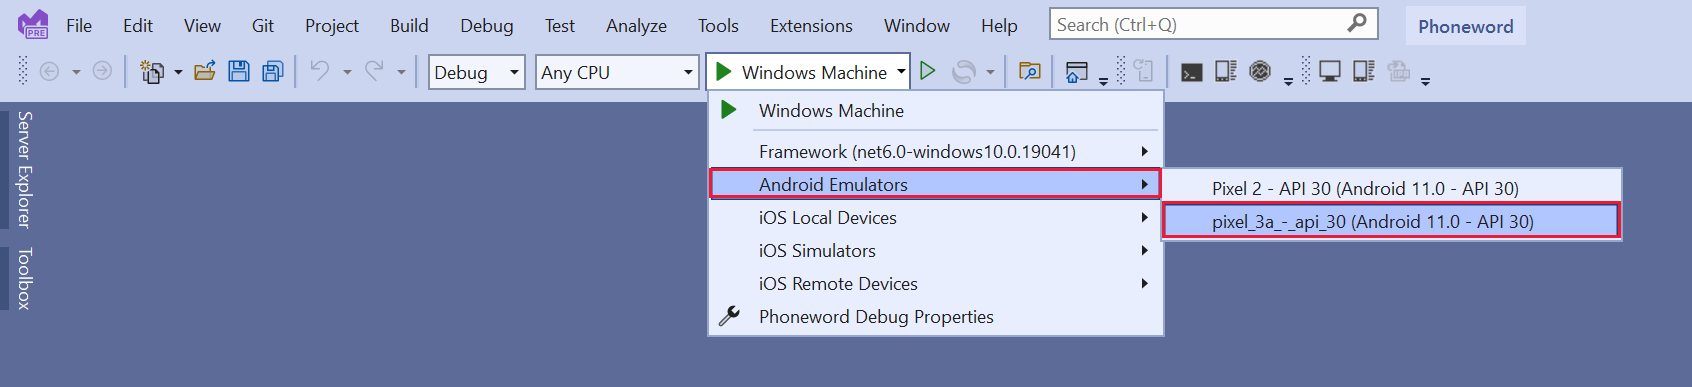 A screenshot of the Visual Studio toolbar. The user has specified the Pixel 3 with the API 30 profile for the Android emulator to start debugging with.